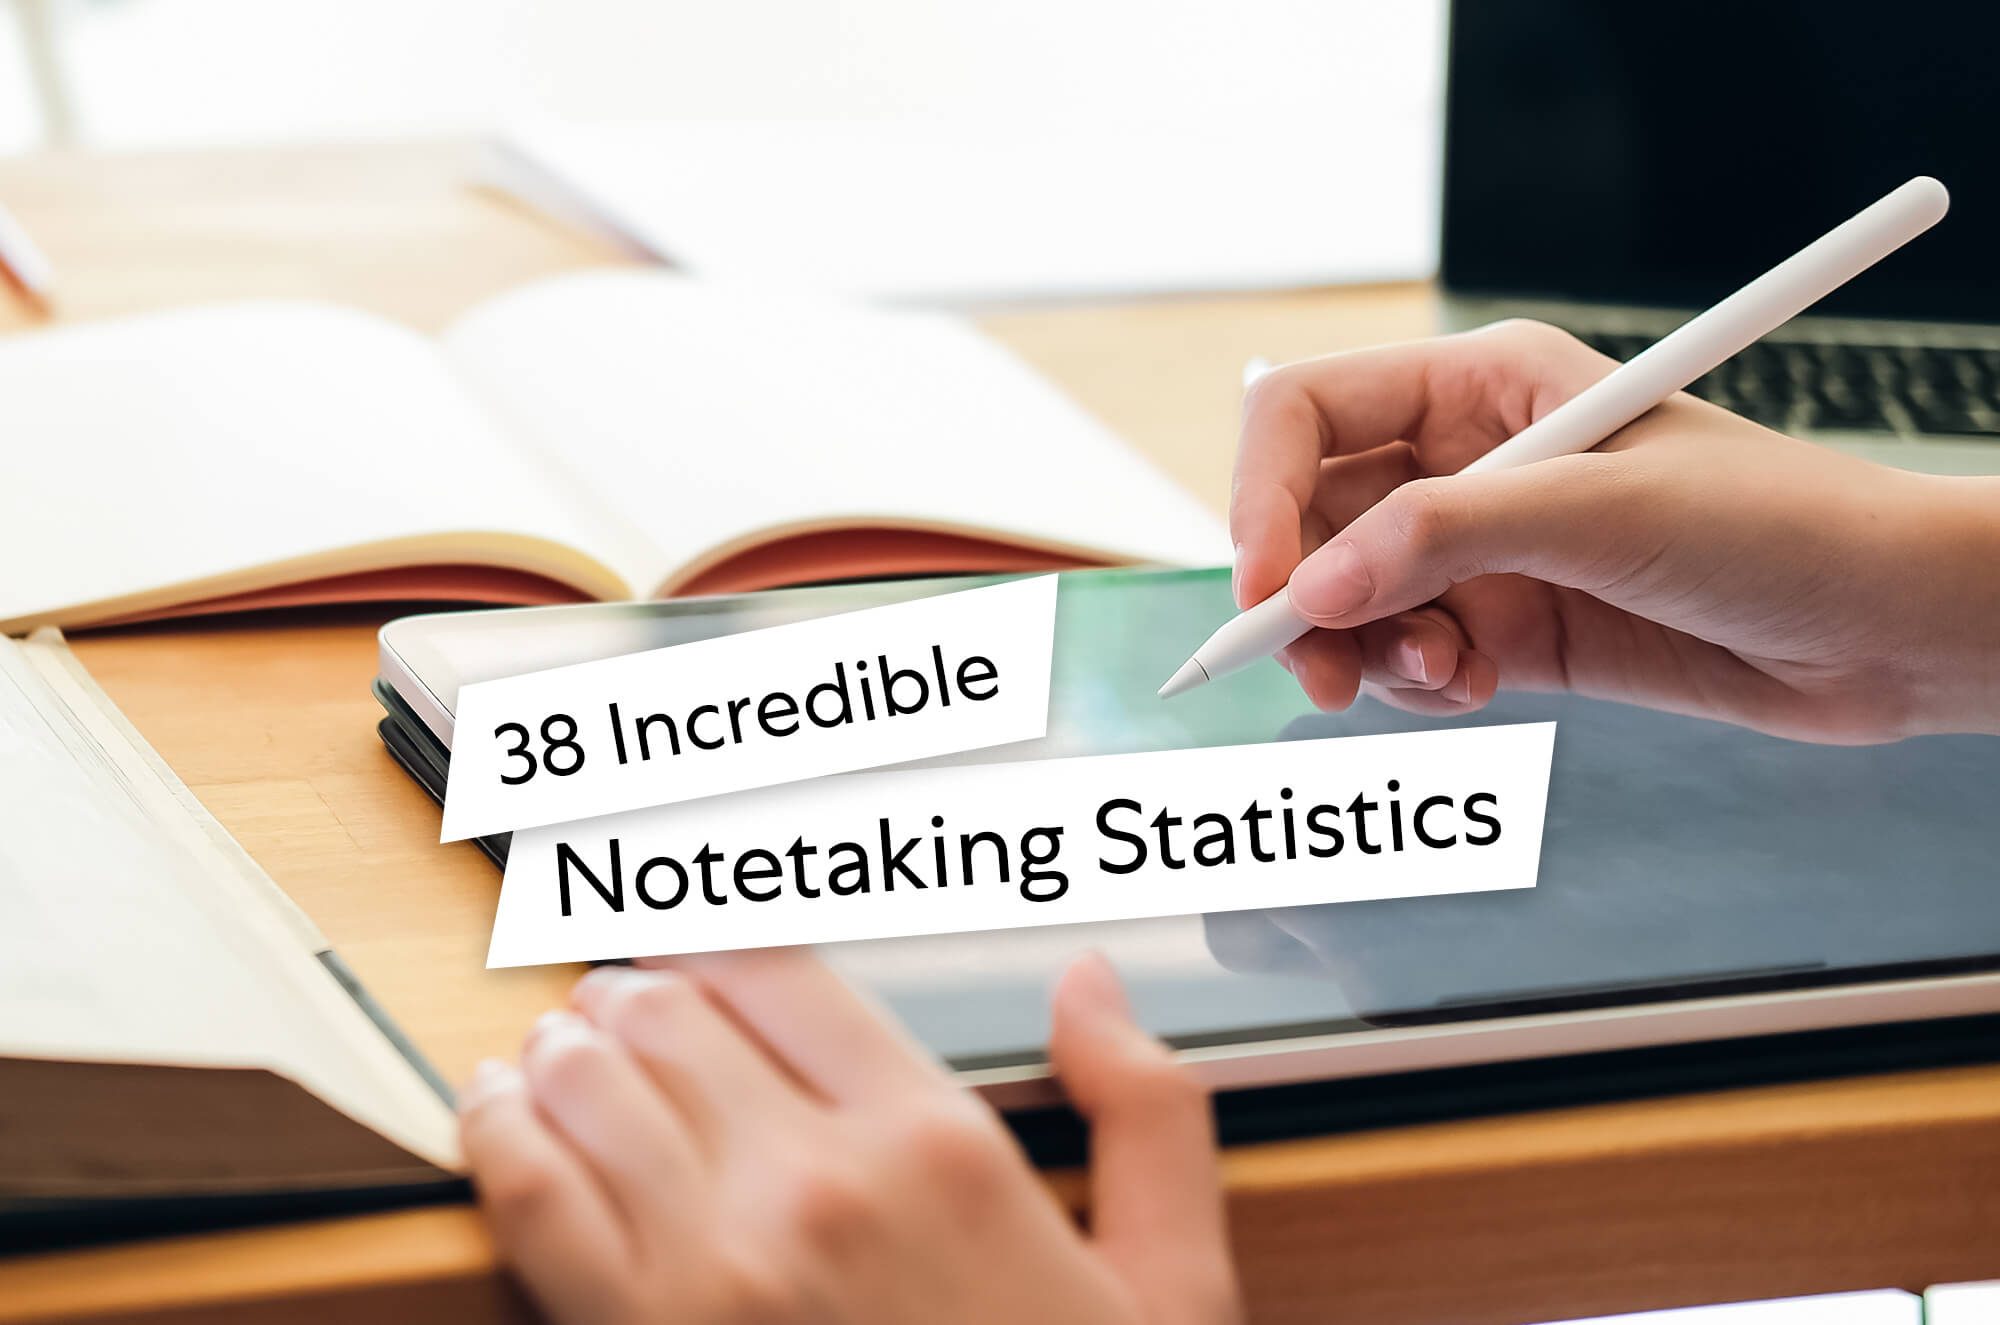 38 Incredible Notetaking Statistics You Should Know